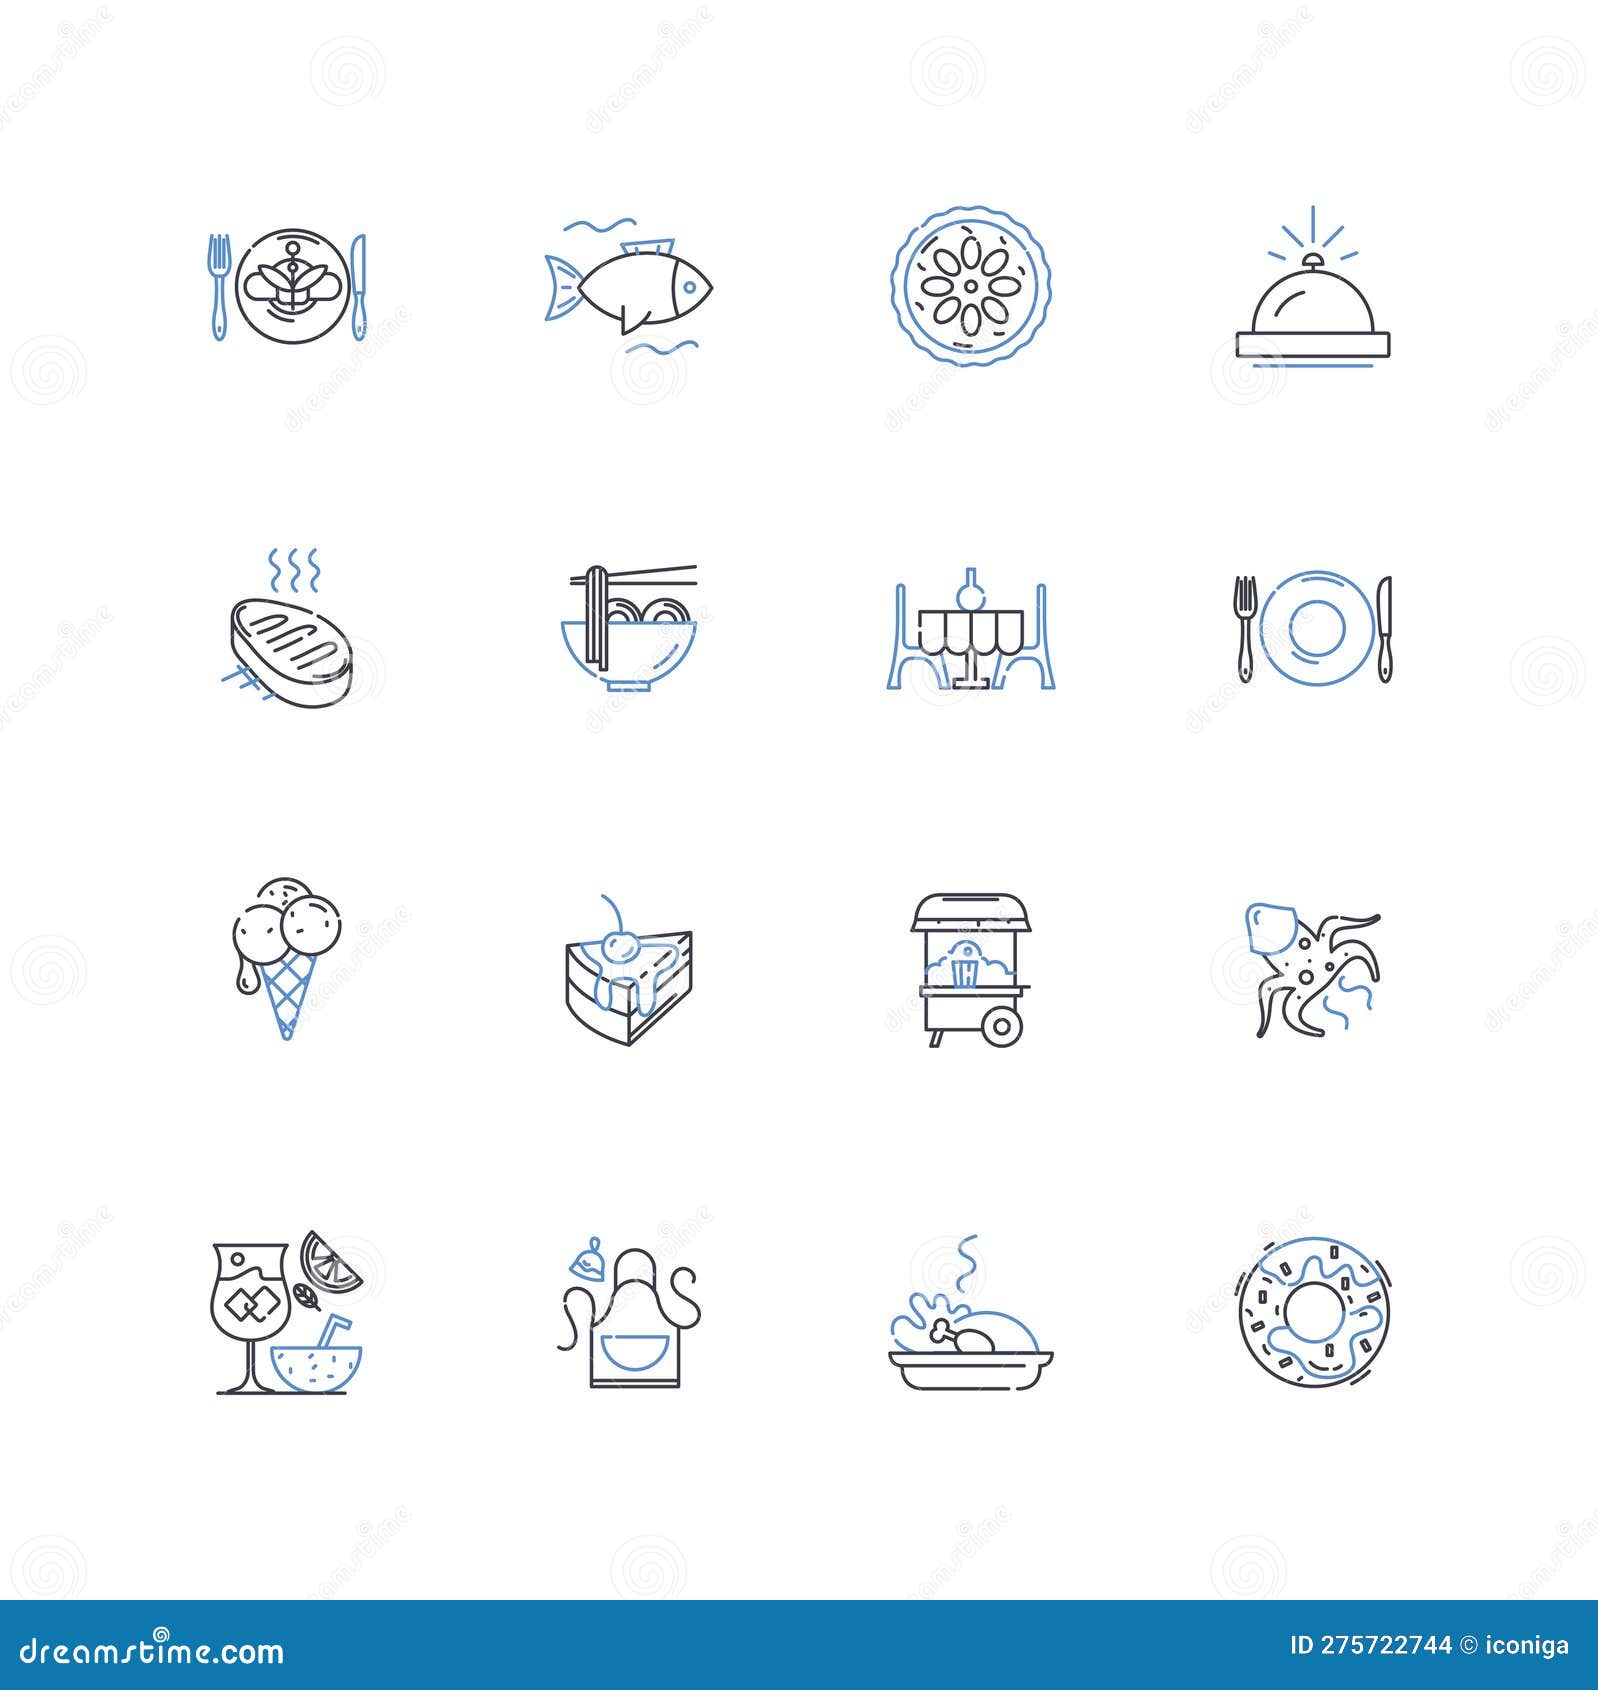 eating-out hub line icons collection. restaurant, diner, cafe, bistro, brasserie, pub, tavern  and linear